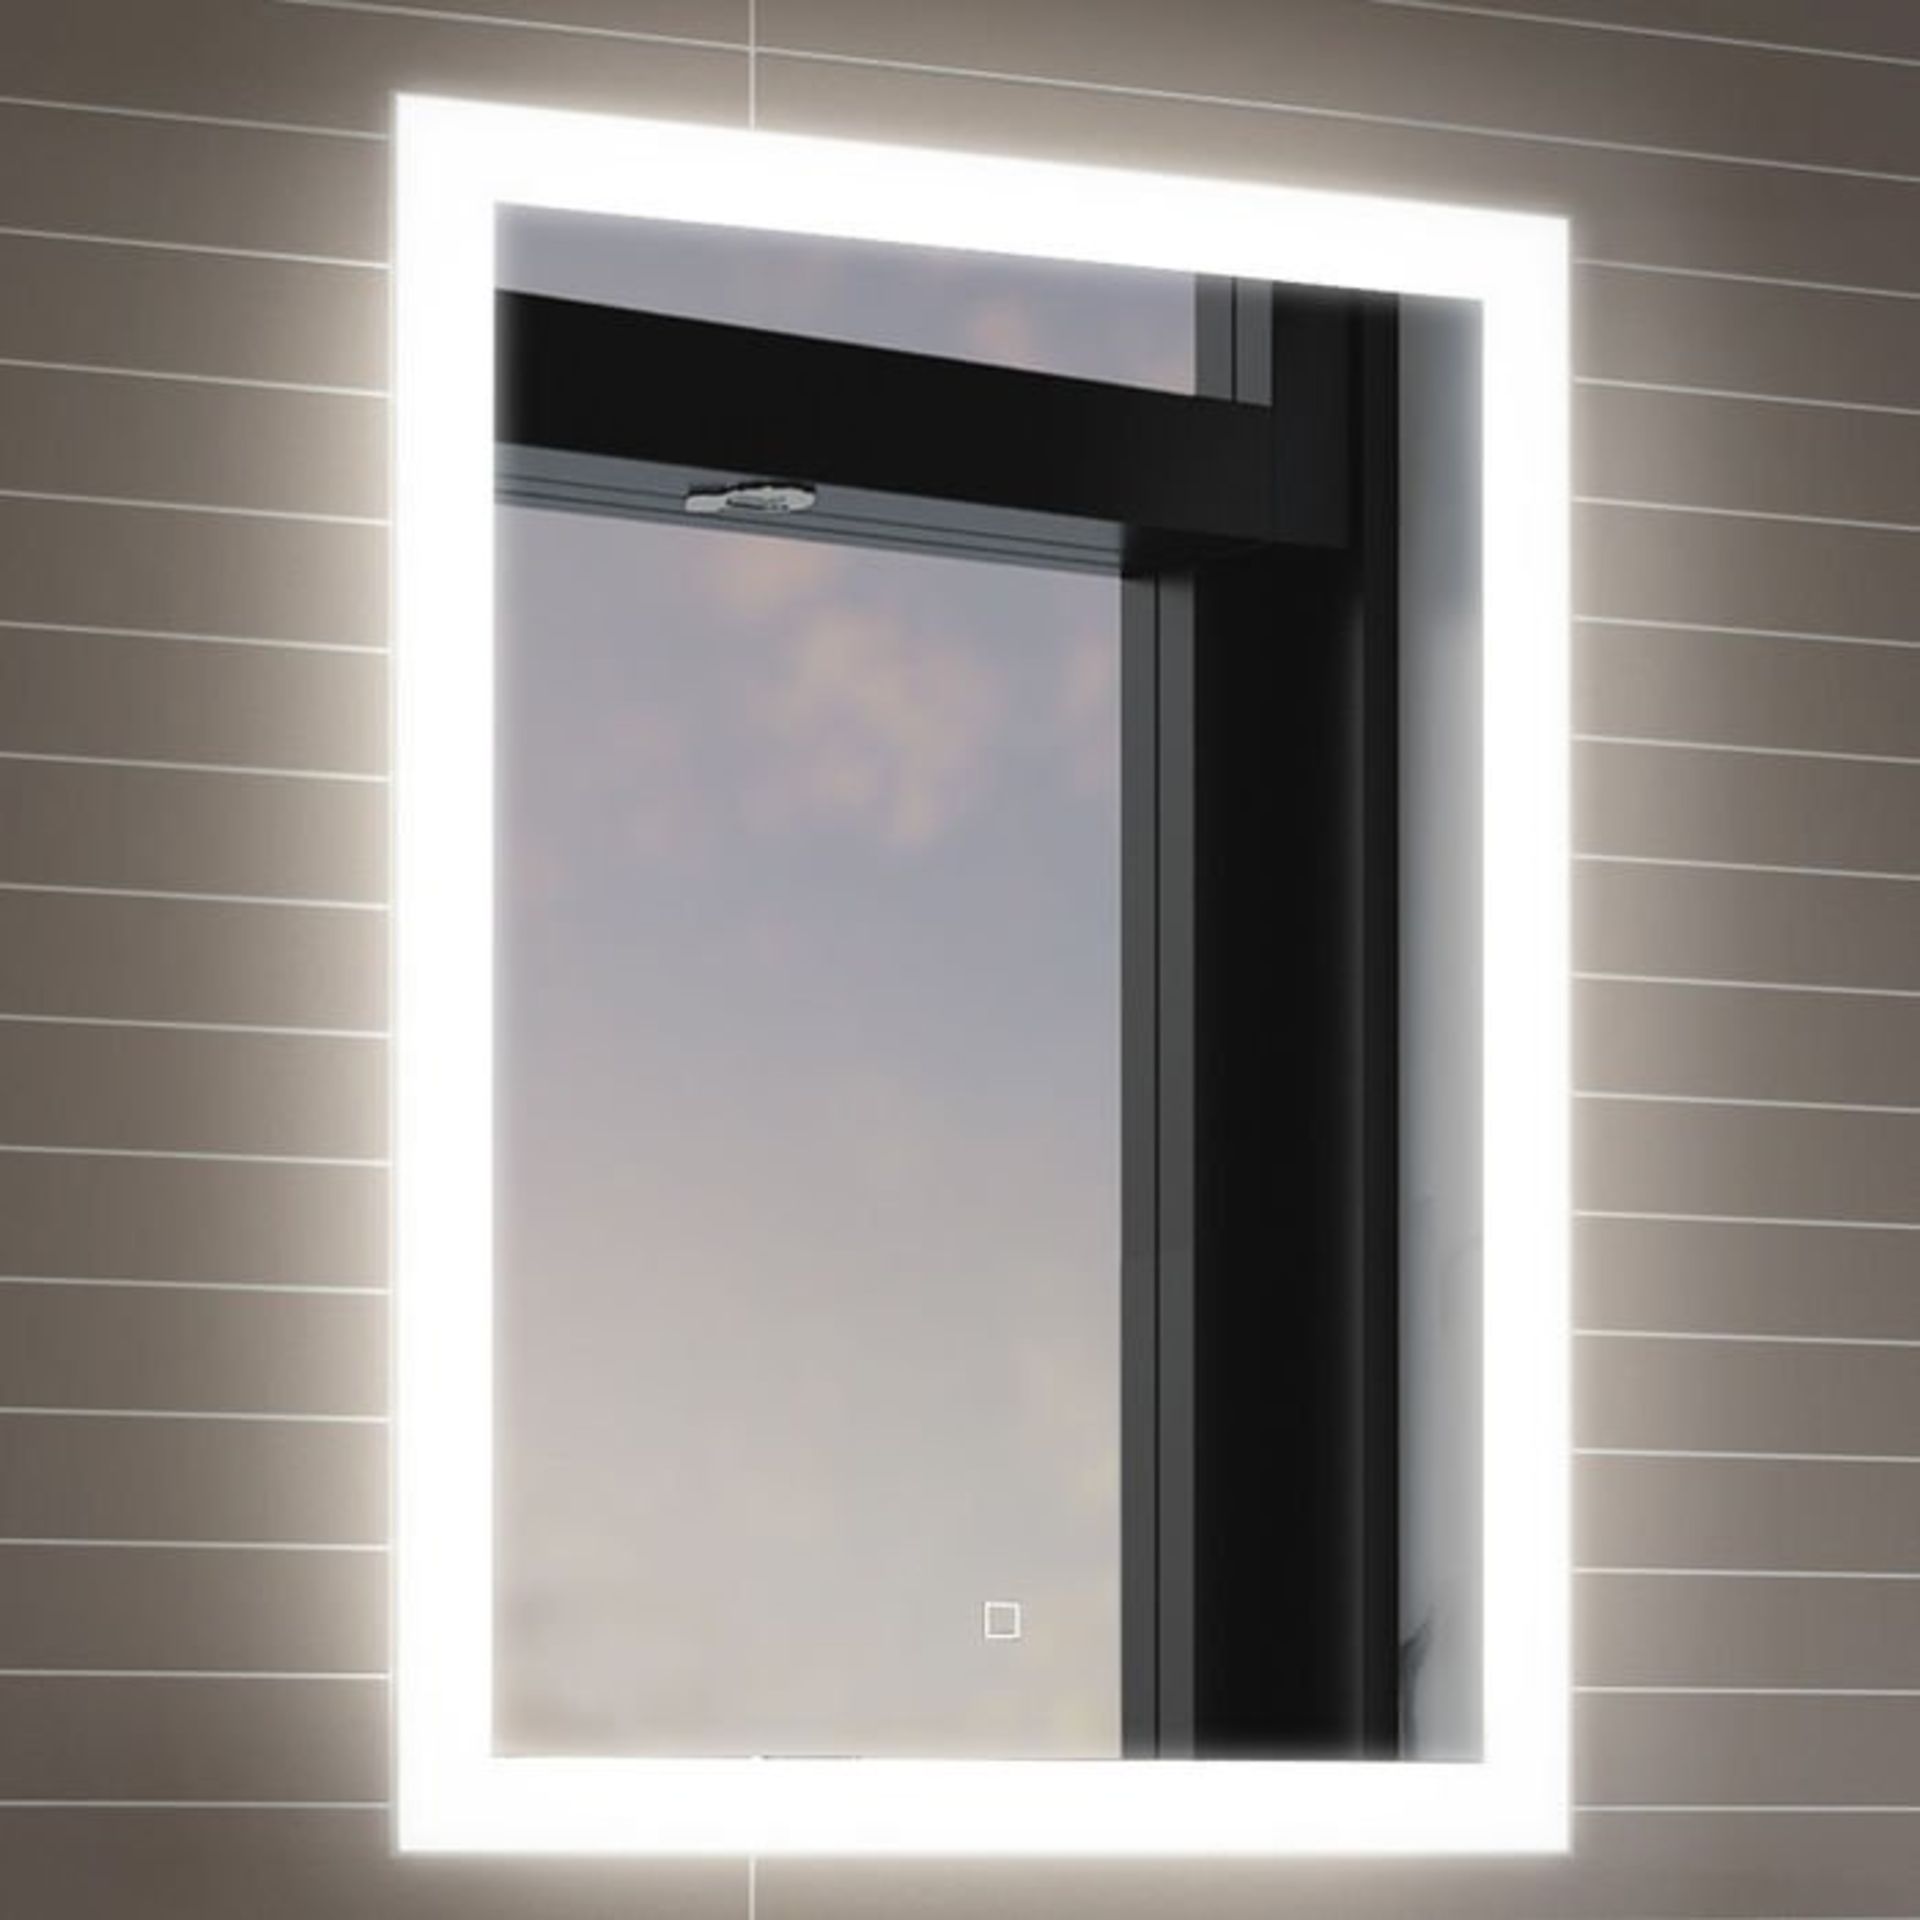 (Y55) 700x500mm Orion Illuminated LED Mirror - Switch Control.RRP £349.99. Energy efficient LED - Image 6 of 6